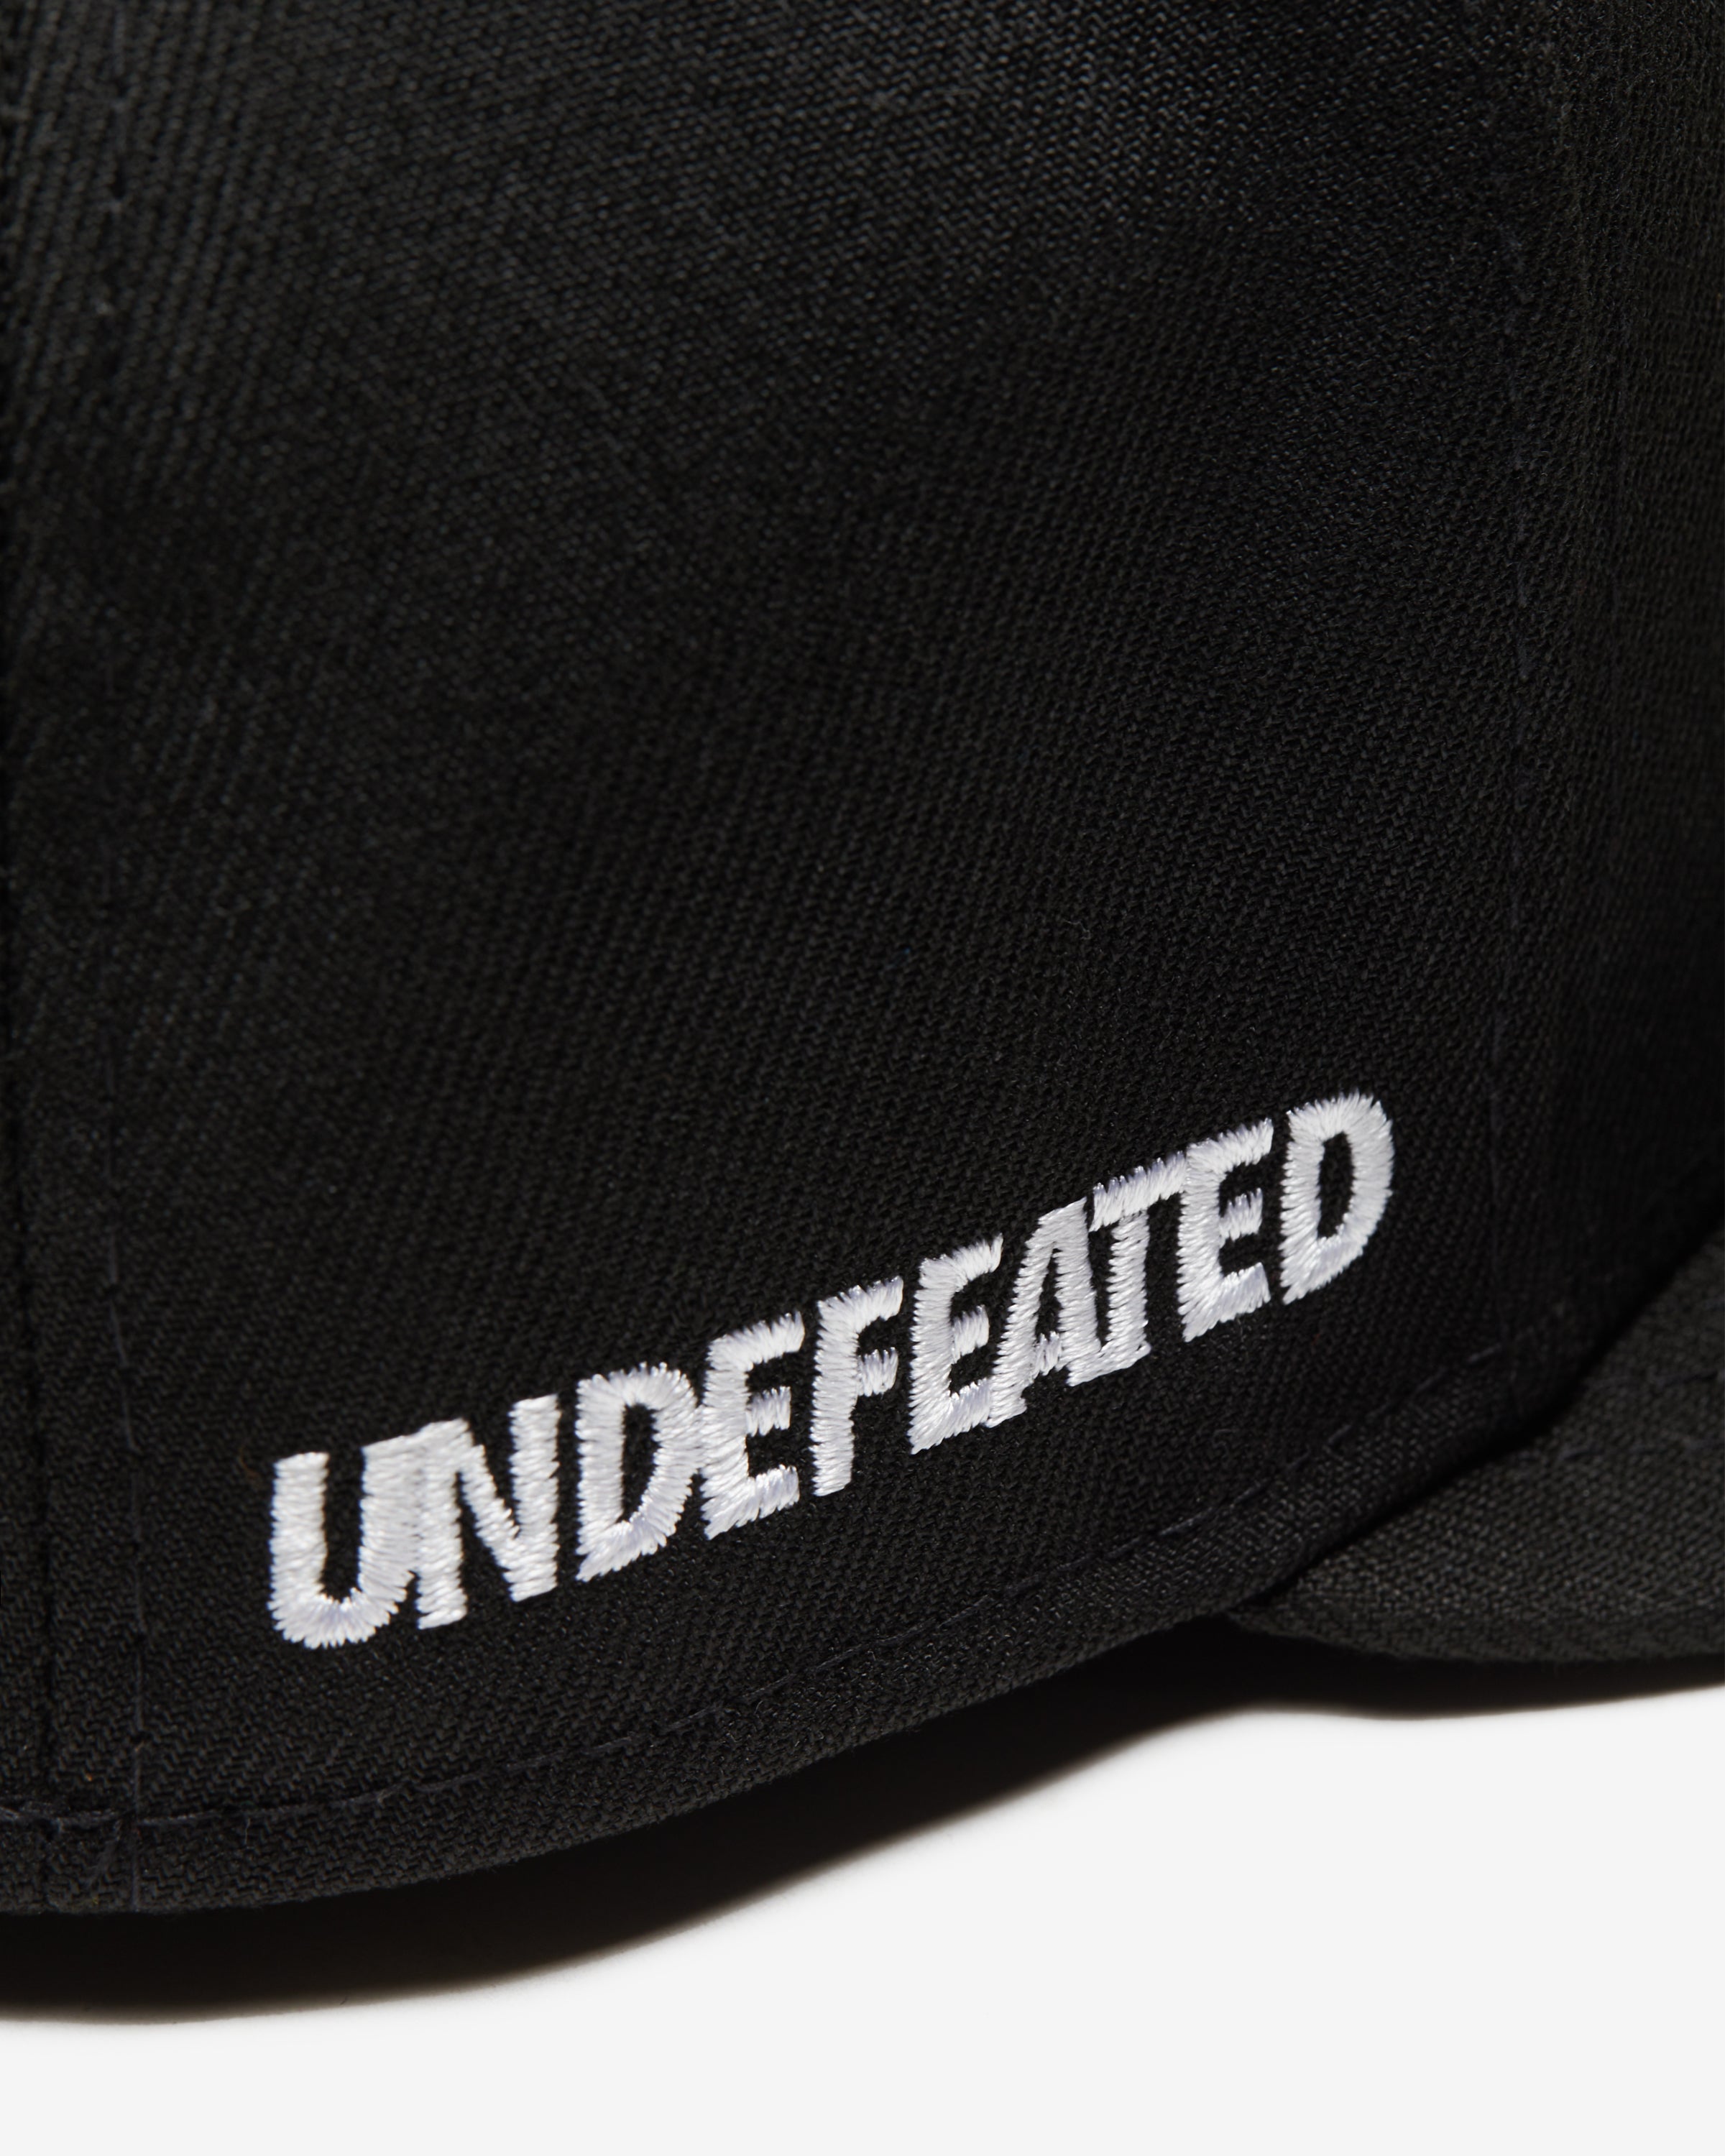 UNDEFEATED X NEW ERA NY YANKEES 59FIFTY FITTED - BLACK – Undefeated